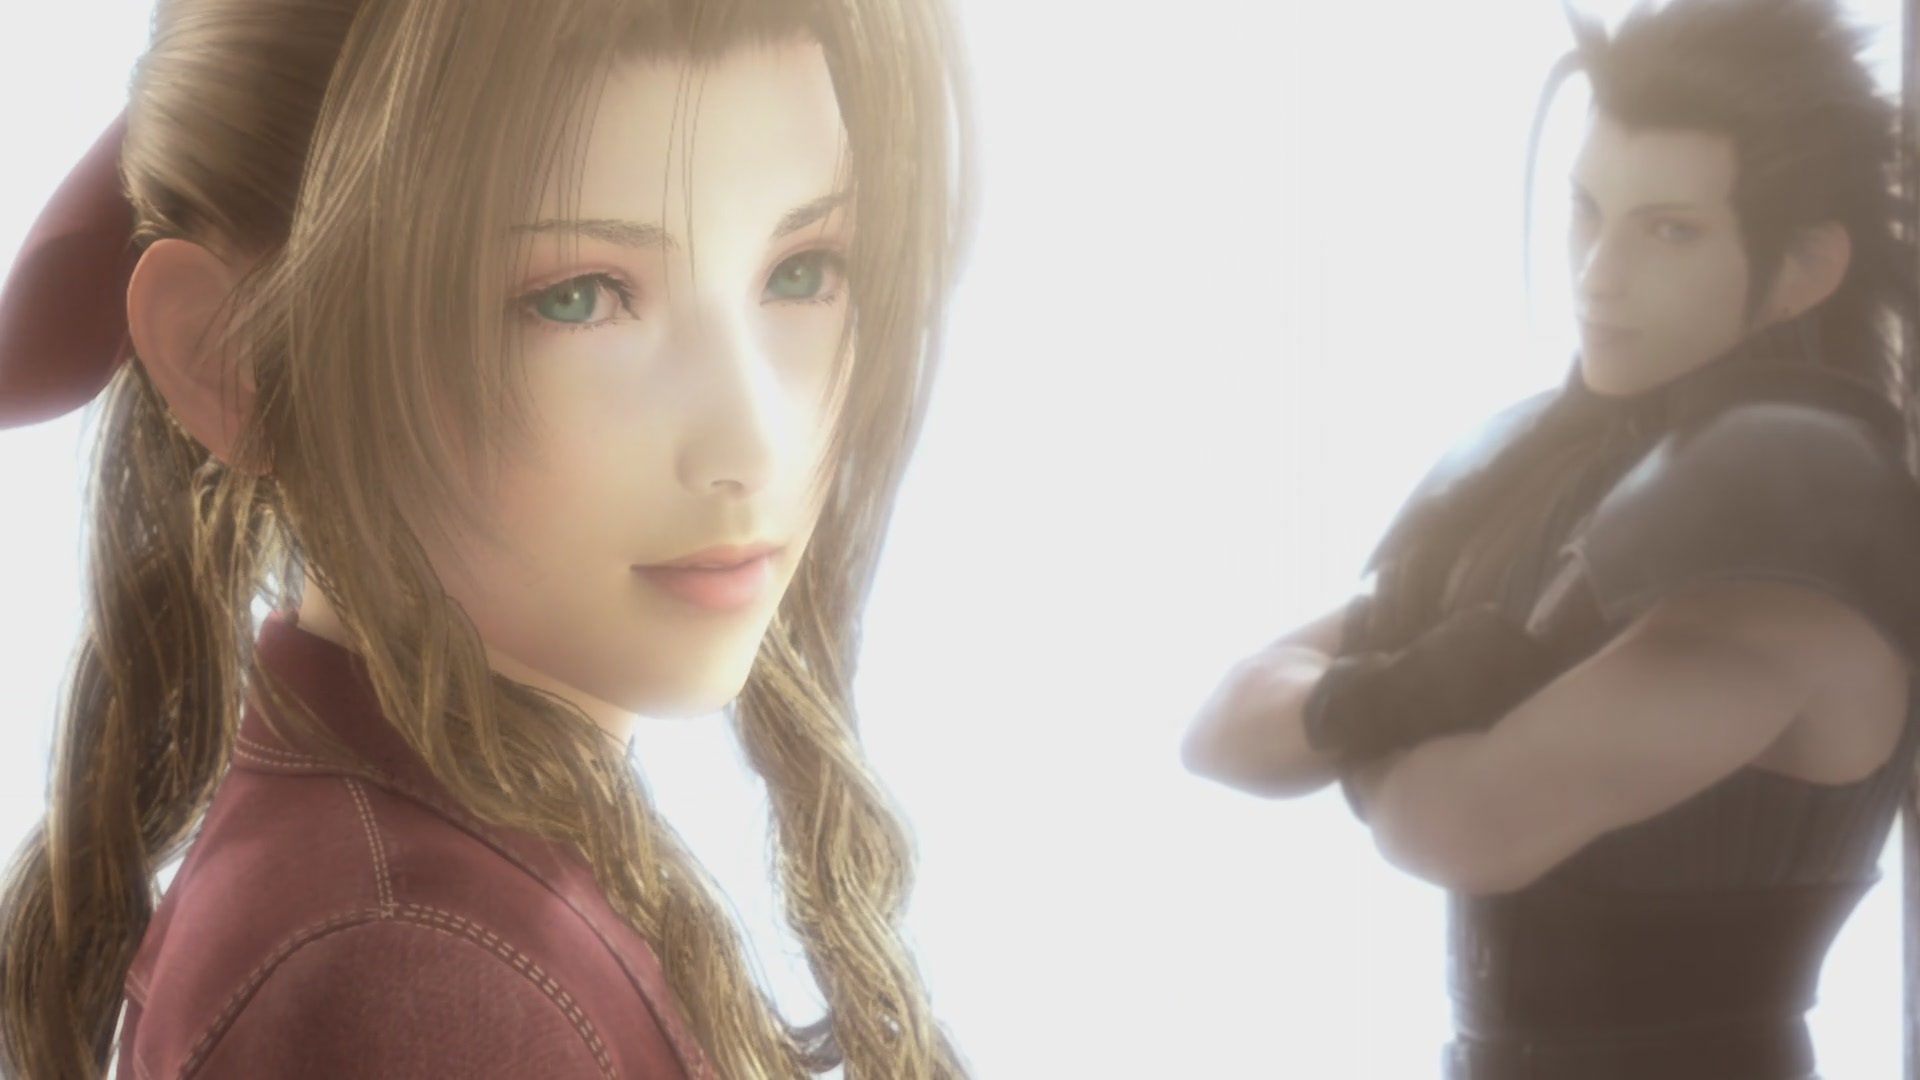 Aerith Image HD Wallpaper And Background Photos